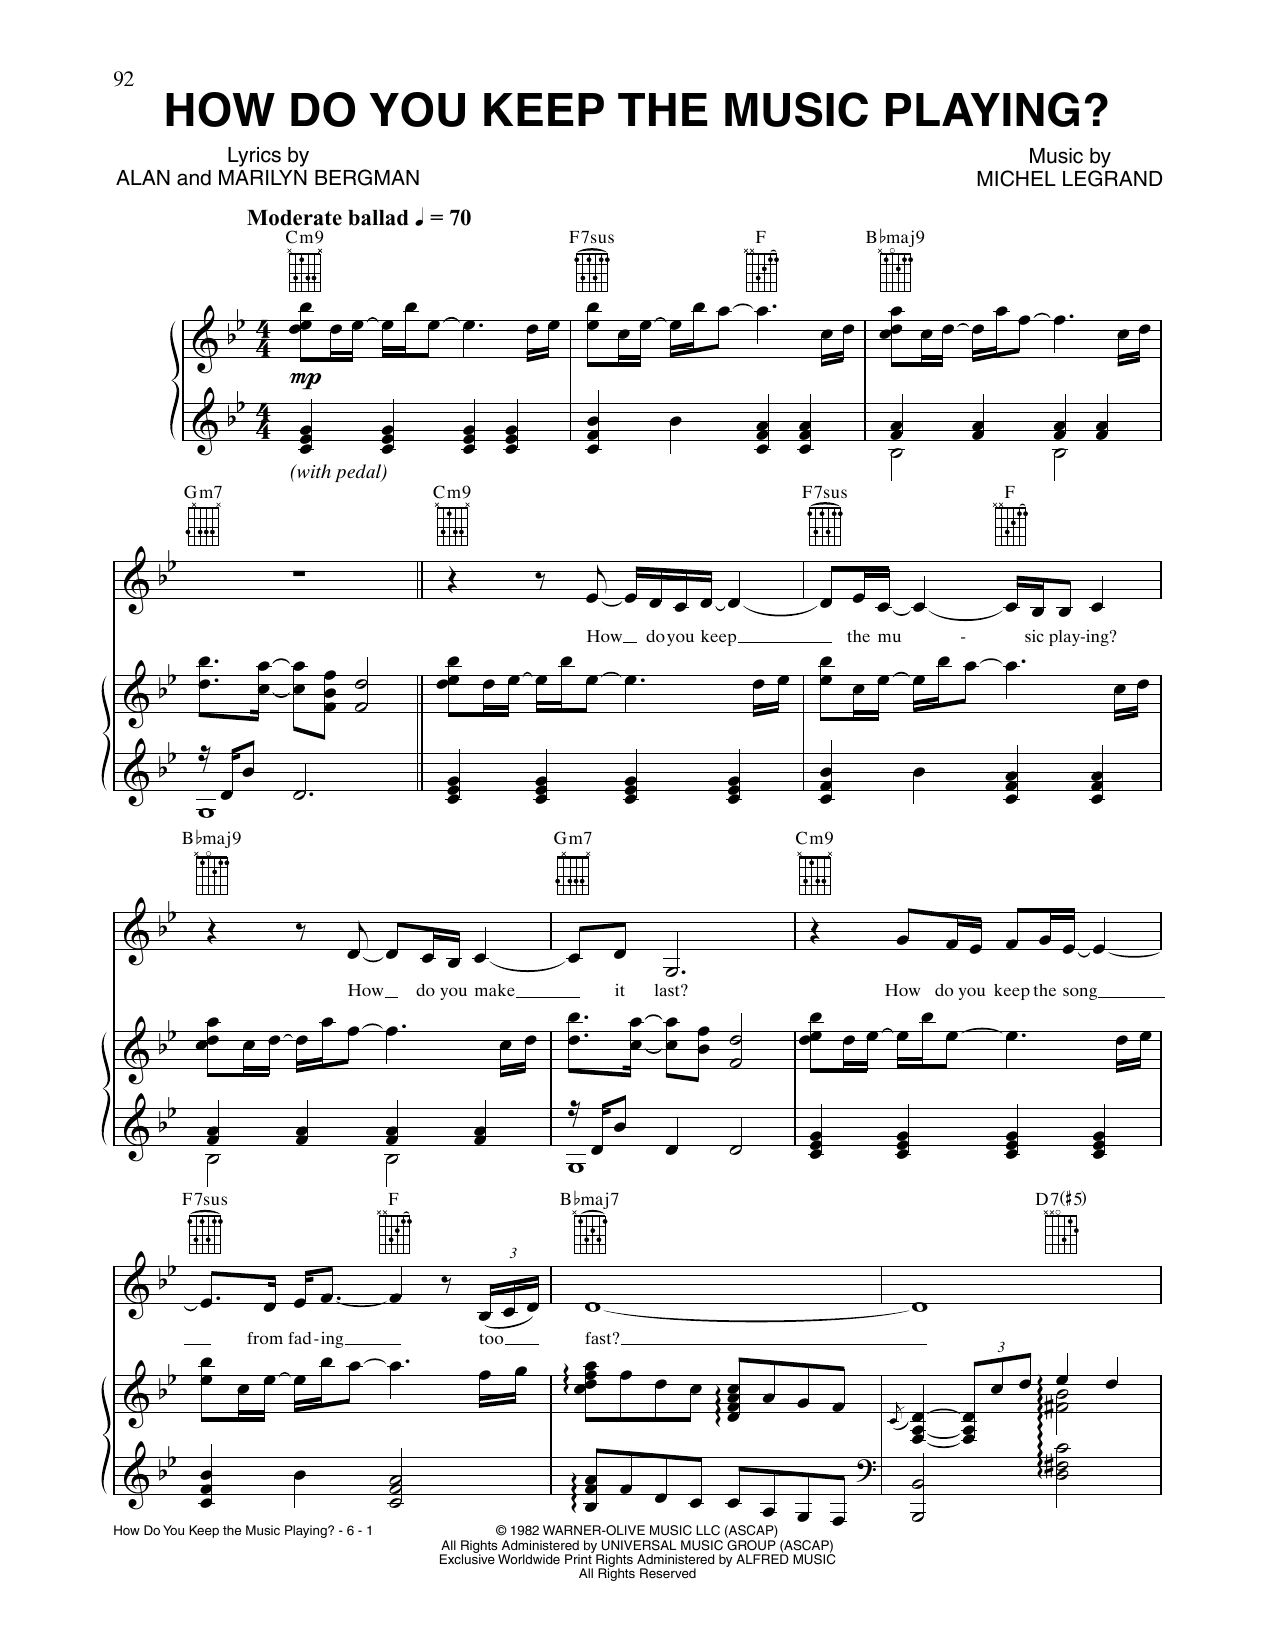 Download Tony Bennett and Aretha Franklin How Do You Keep The Music Playing? Sheet Music